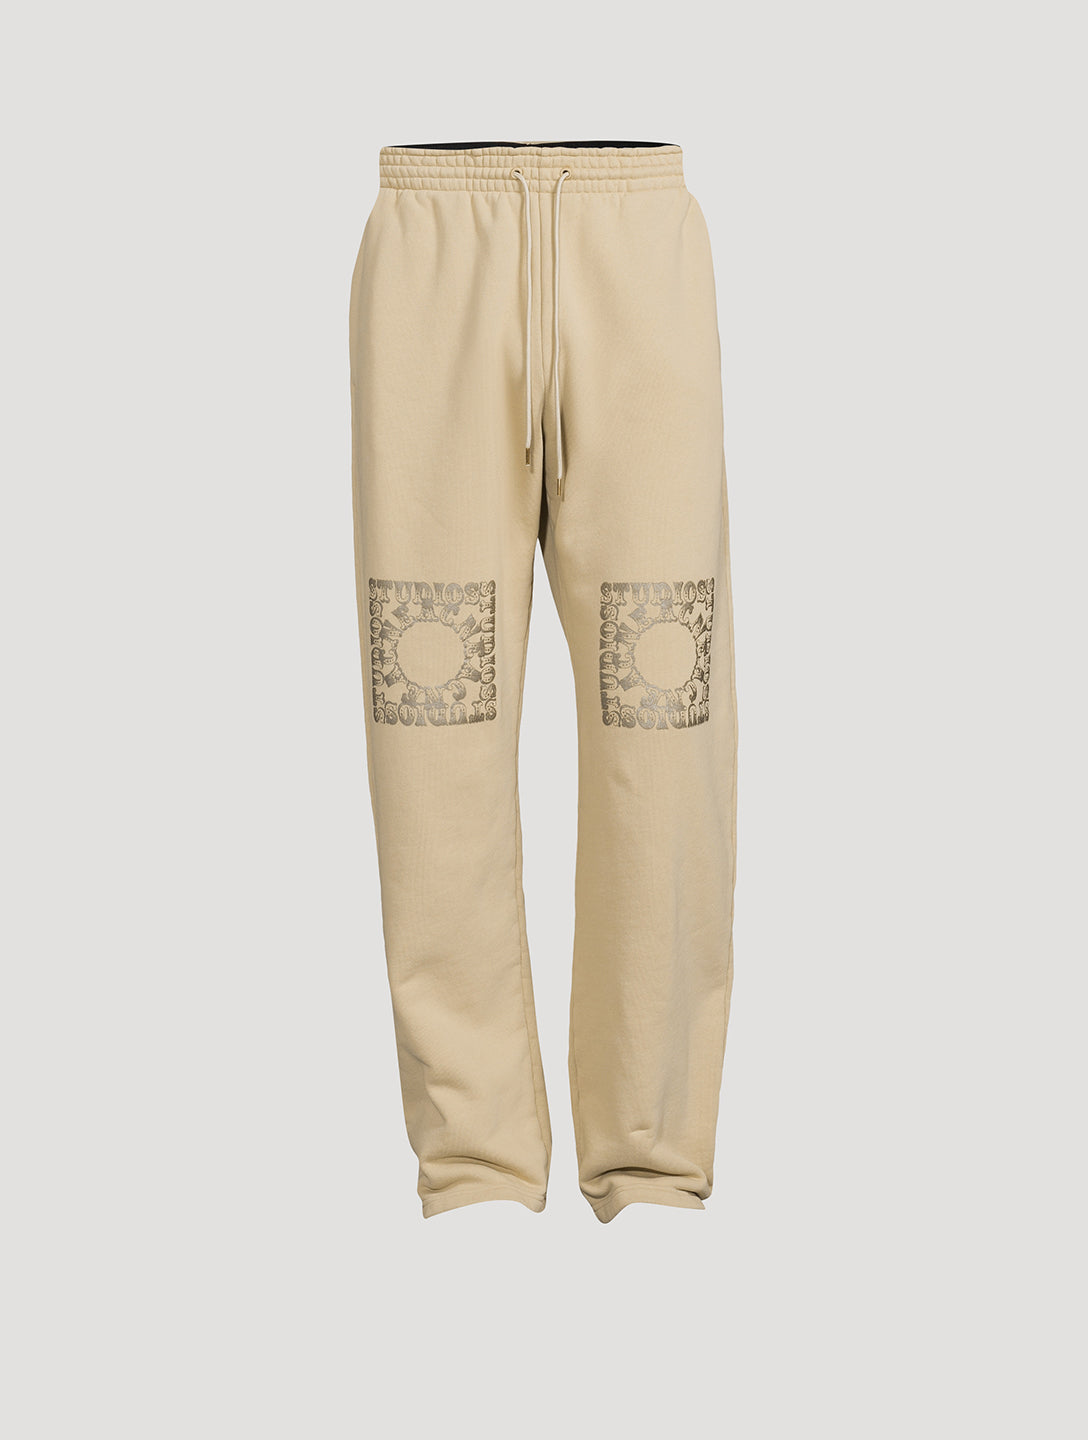 ACNE STUDIOS - POWDER GREEN TRACKSUIT TROUSERS - LE LABO STORE